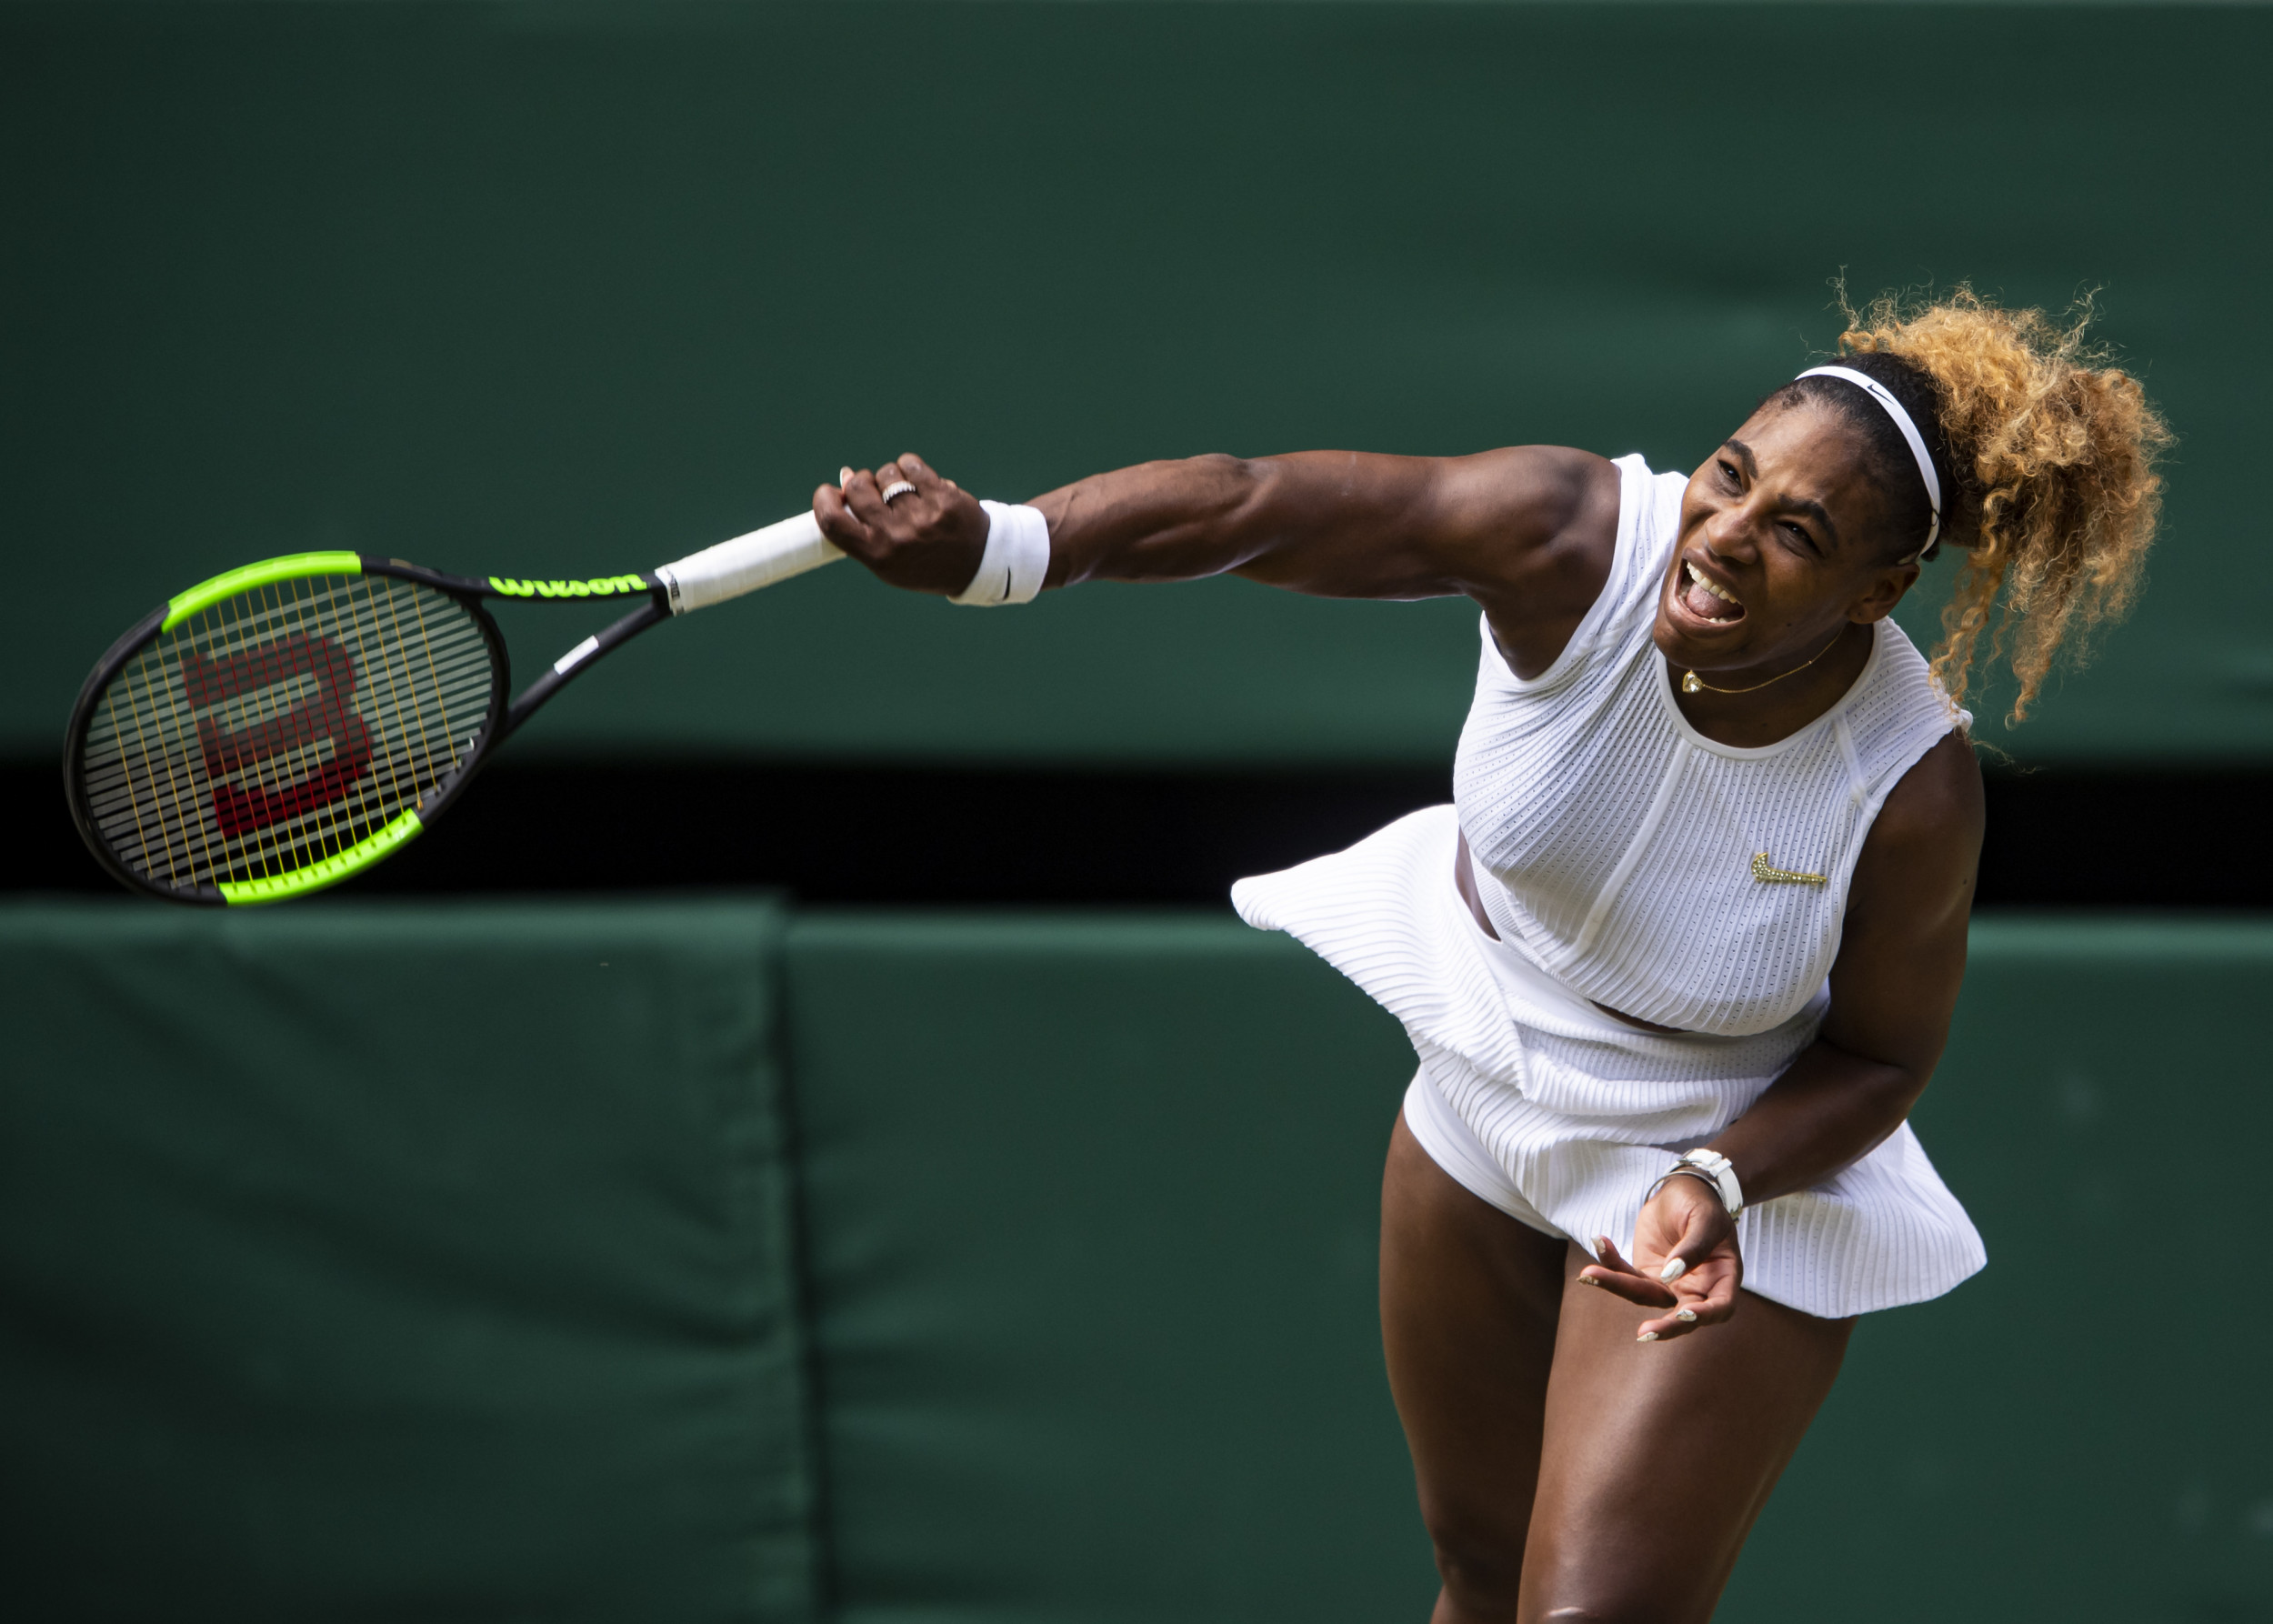 Wimbledon 2019 How to Watch Serena Williams Semifinal Match, Start Time, Live Stream and Odds